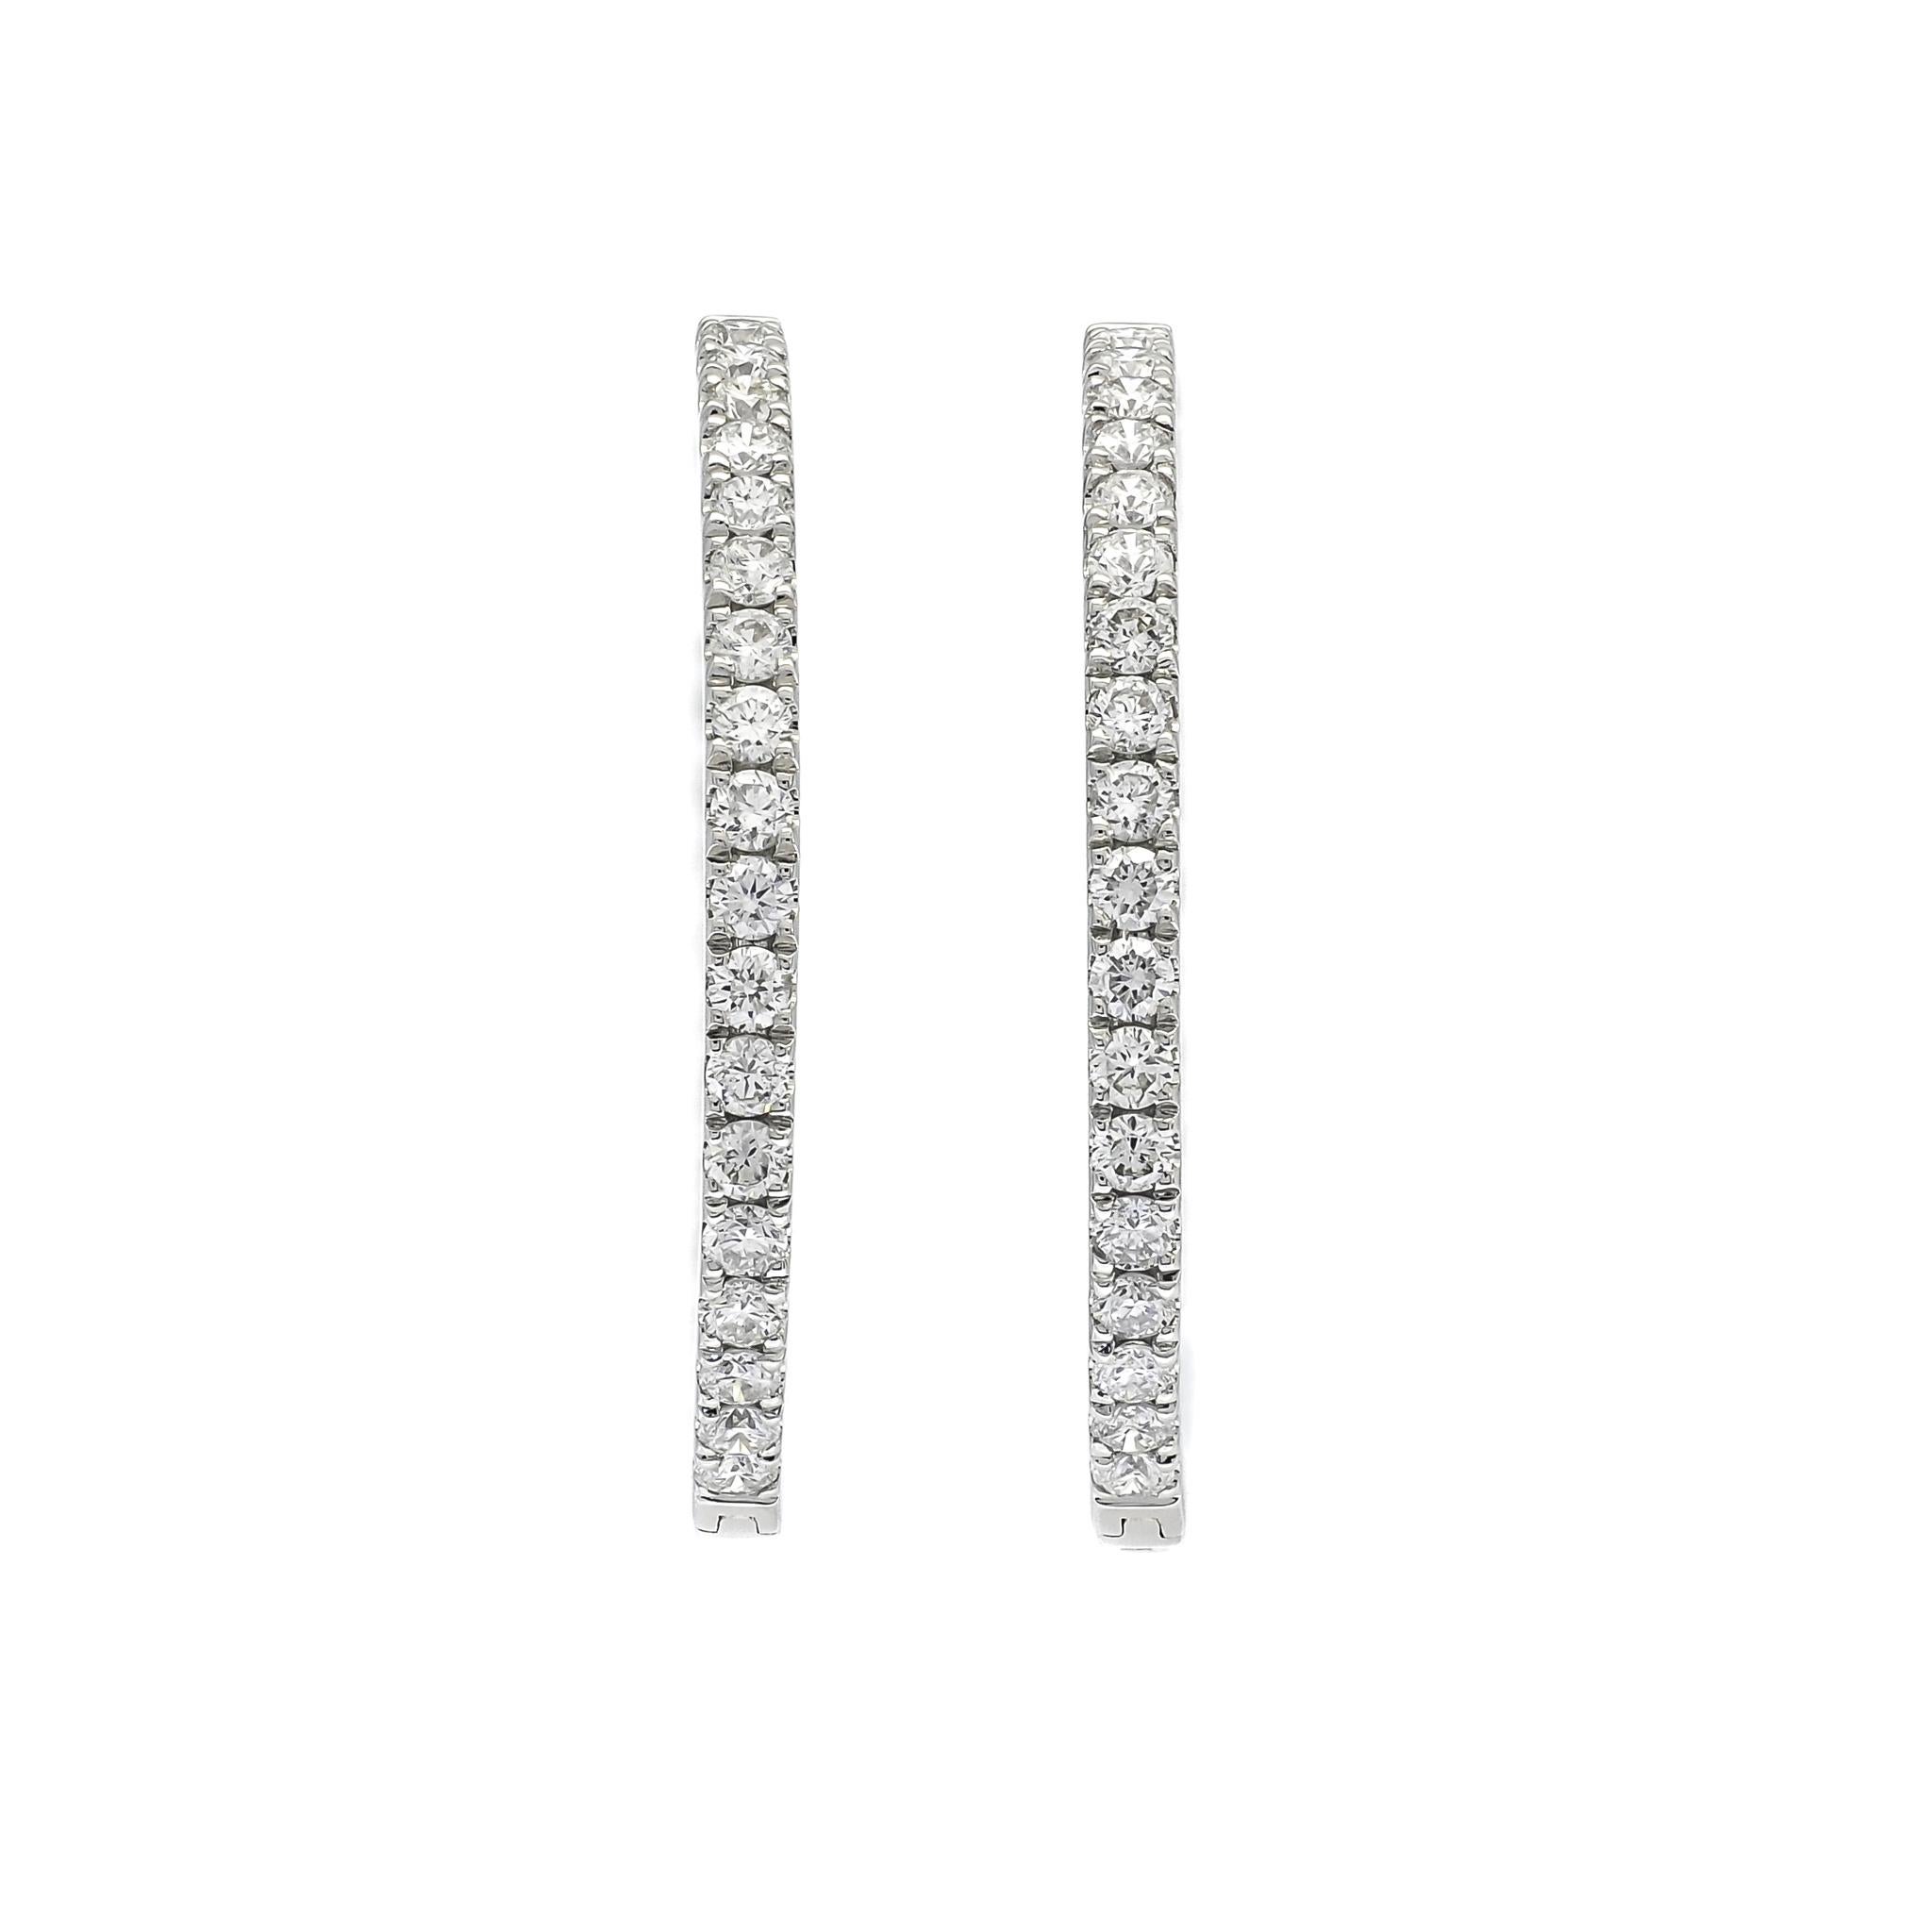 Brilliant Cut Natural Diamond 1.94CT 18Karat White Gold Inside/Out Hoop Earrings For Sale